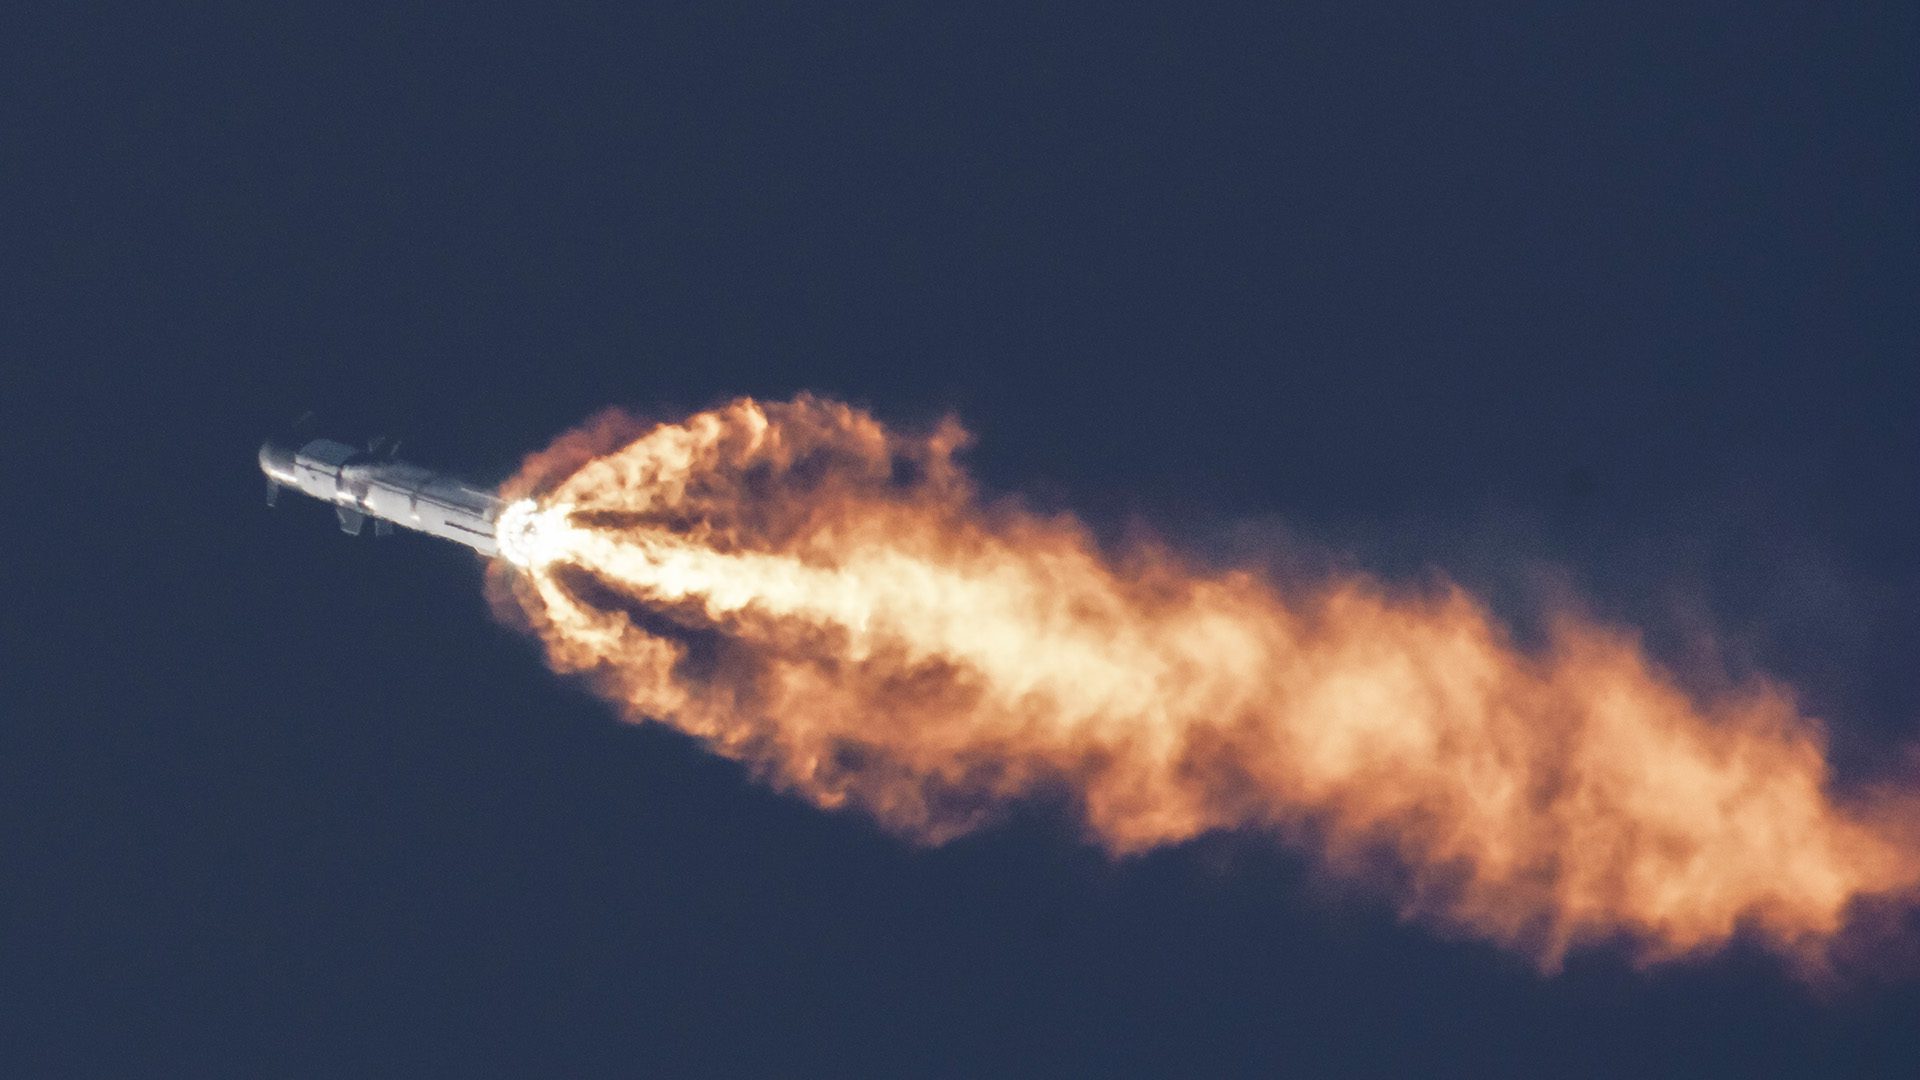 SpaceX’s Starship Rocket Lifts Off and Explodes